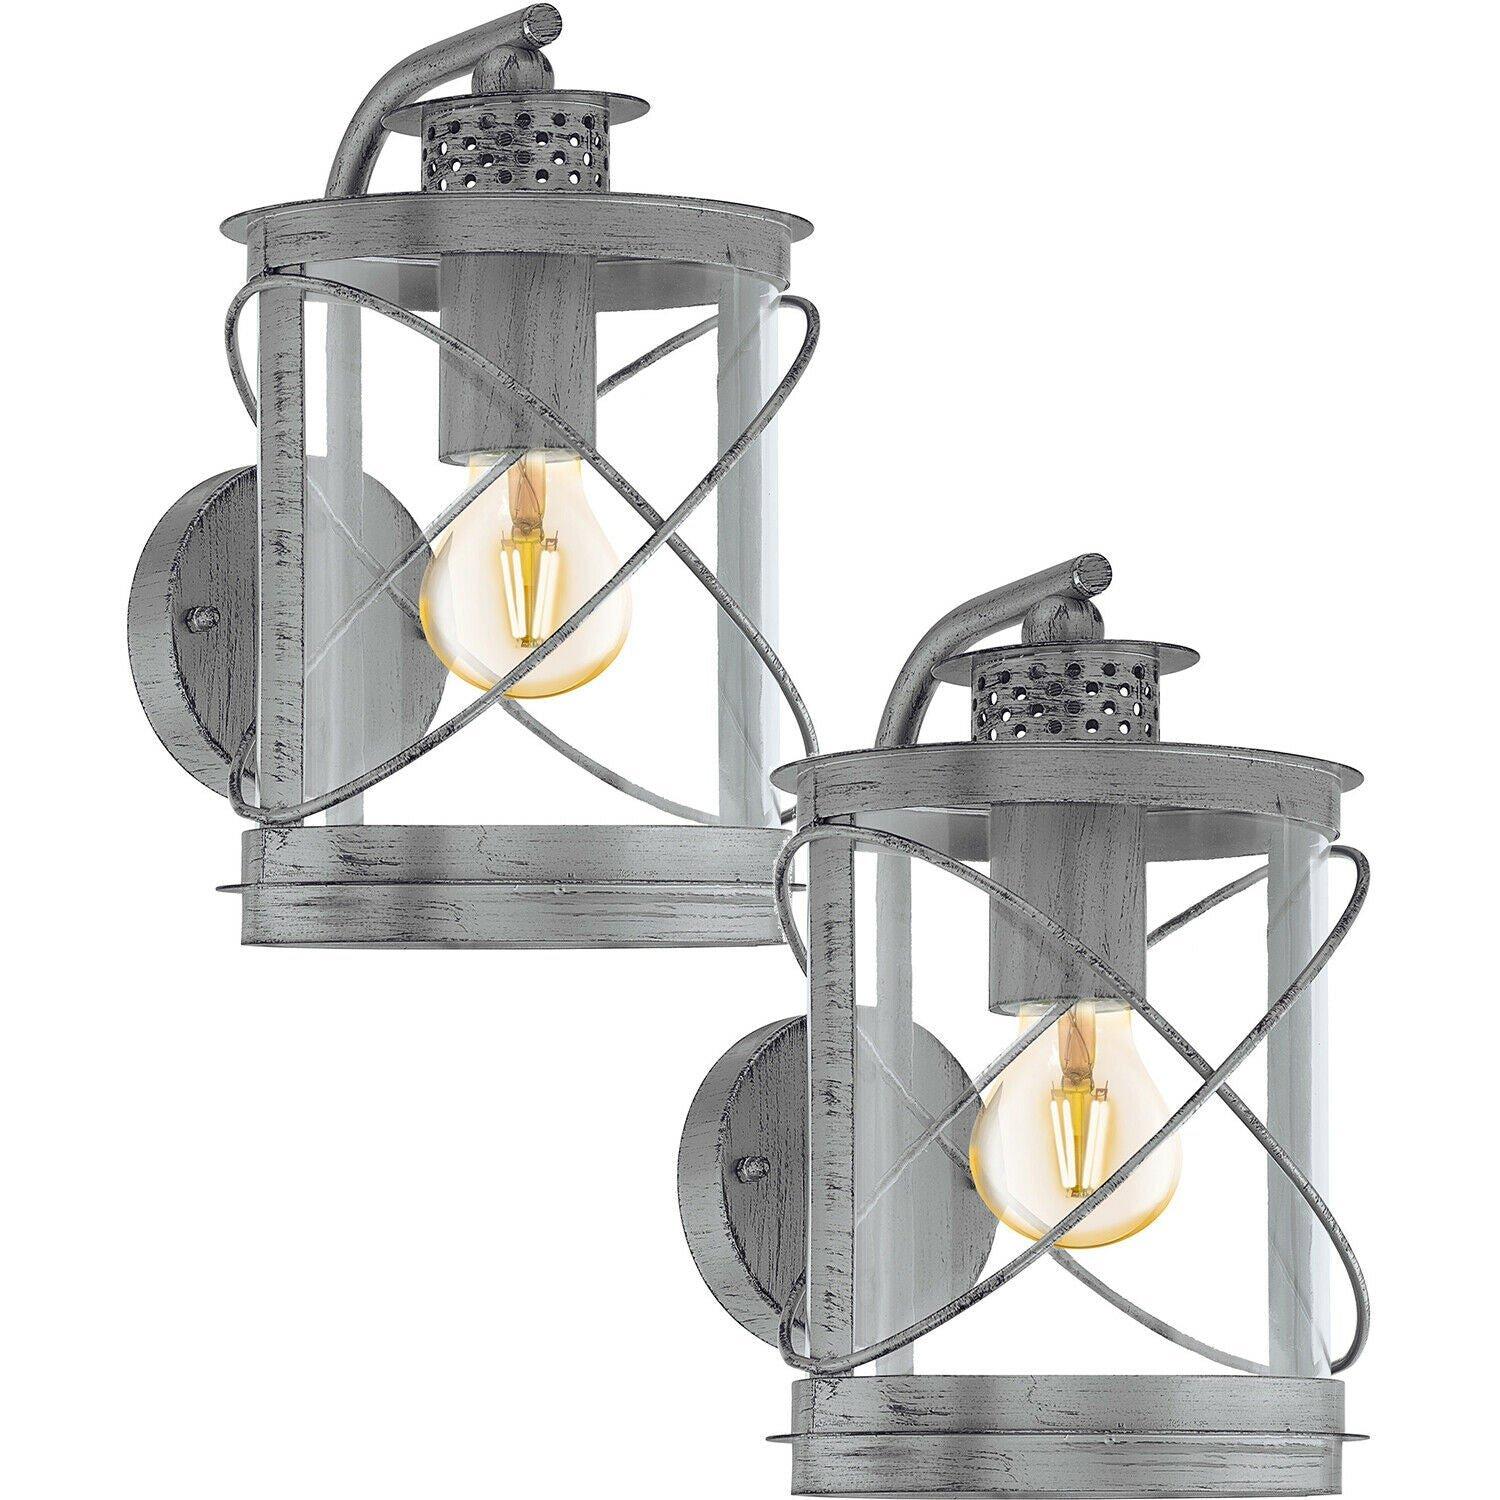 2 PACK IP44 Outdoor Wall Light Antique Silver & Glass Loop Lantern 60W E27